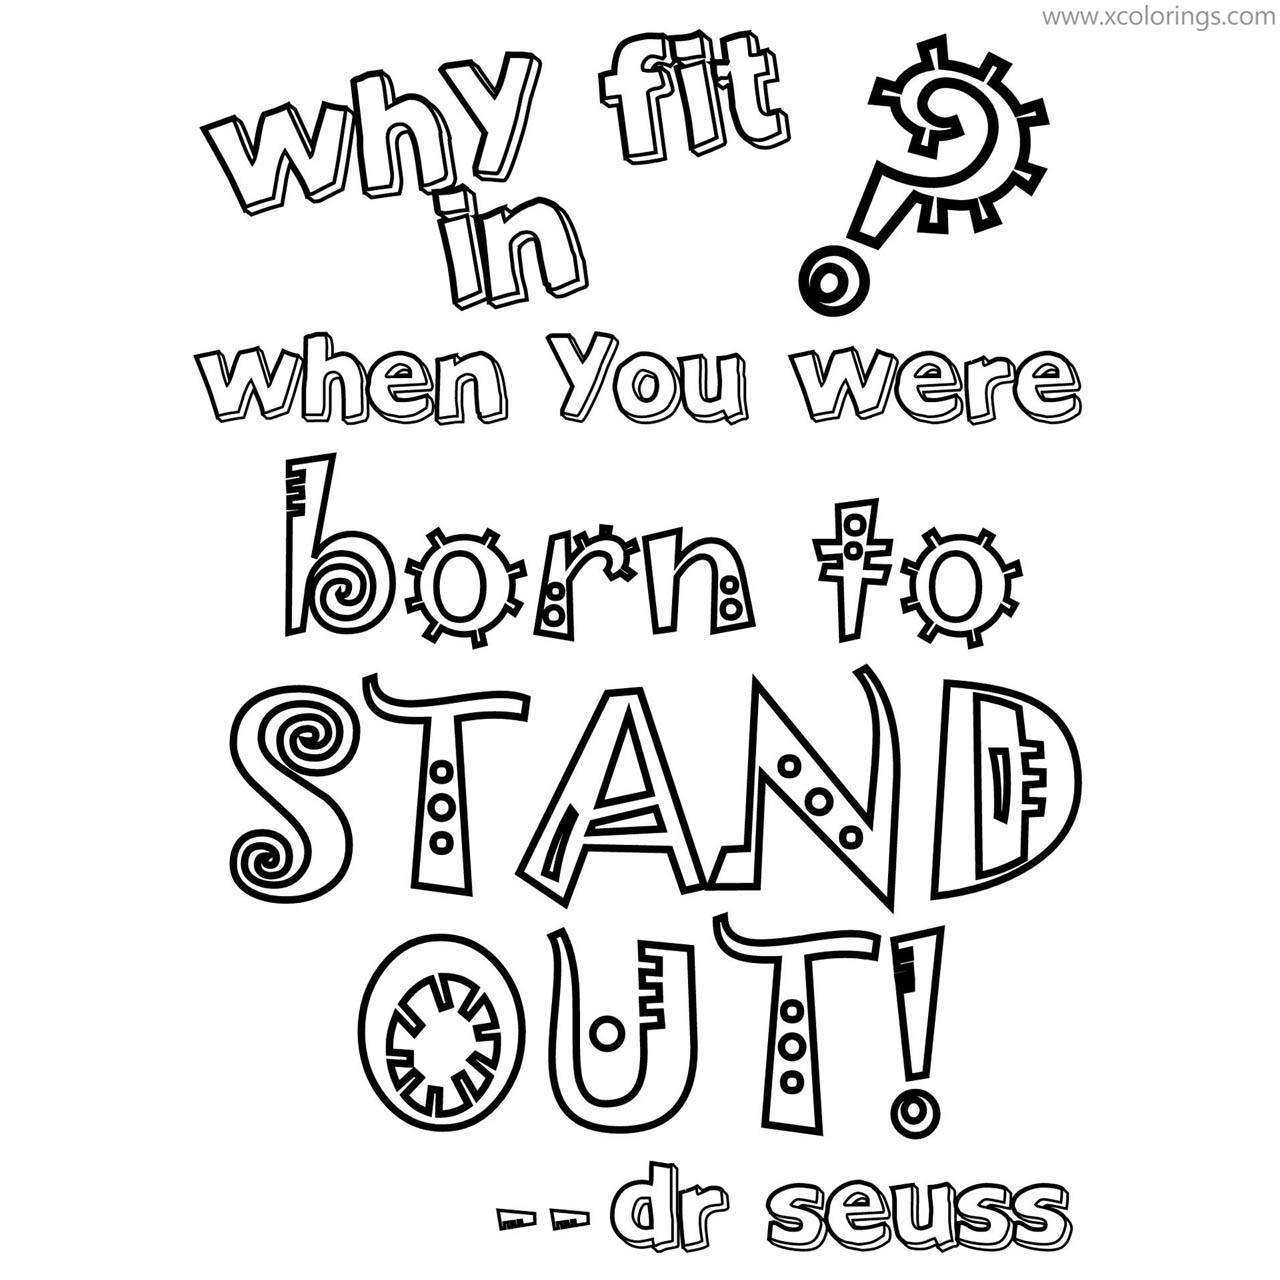 Free Dr Seuss Quotes Coloring Pages You Were Born to Stand Out printable